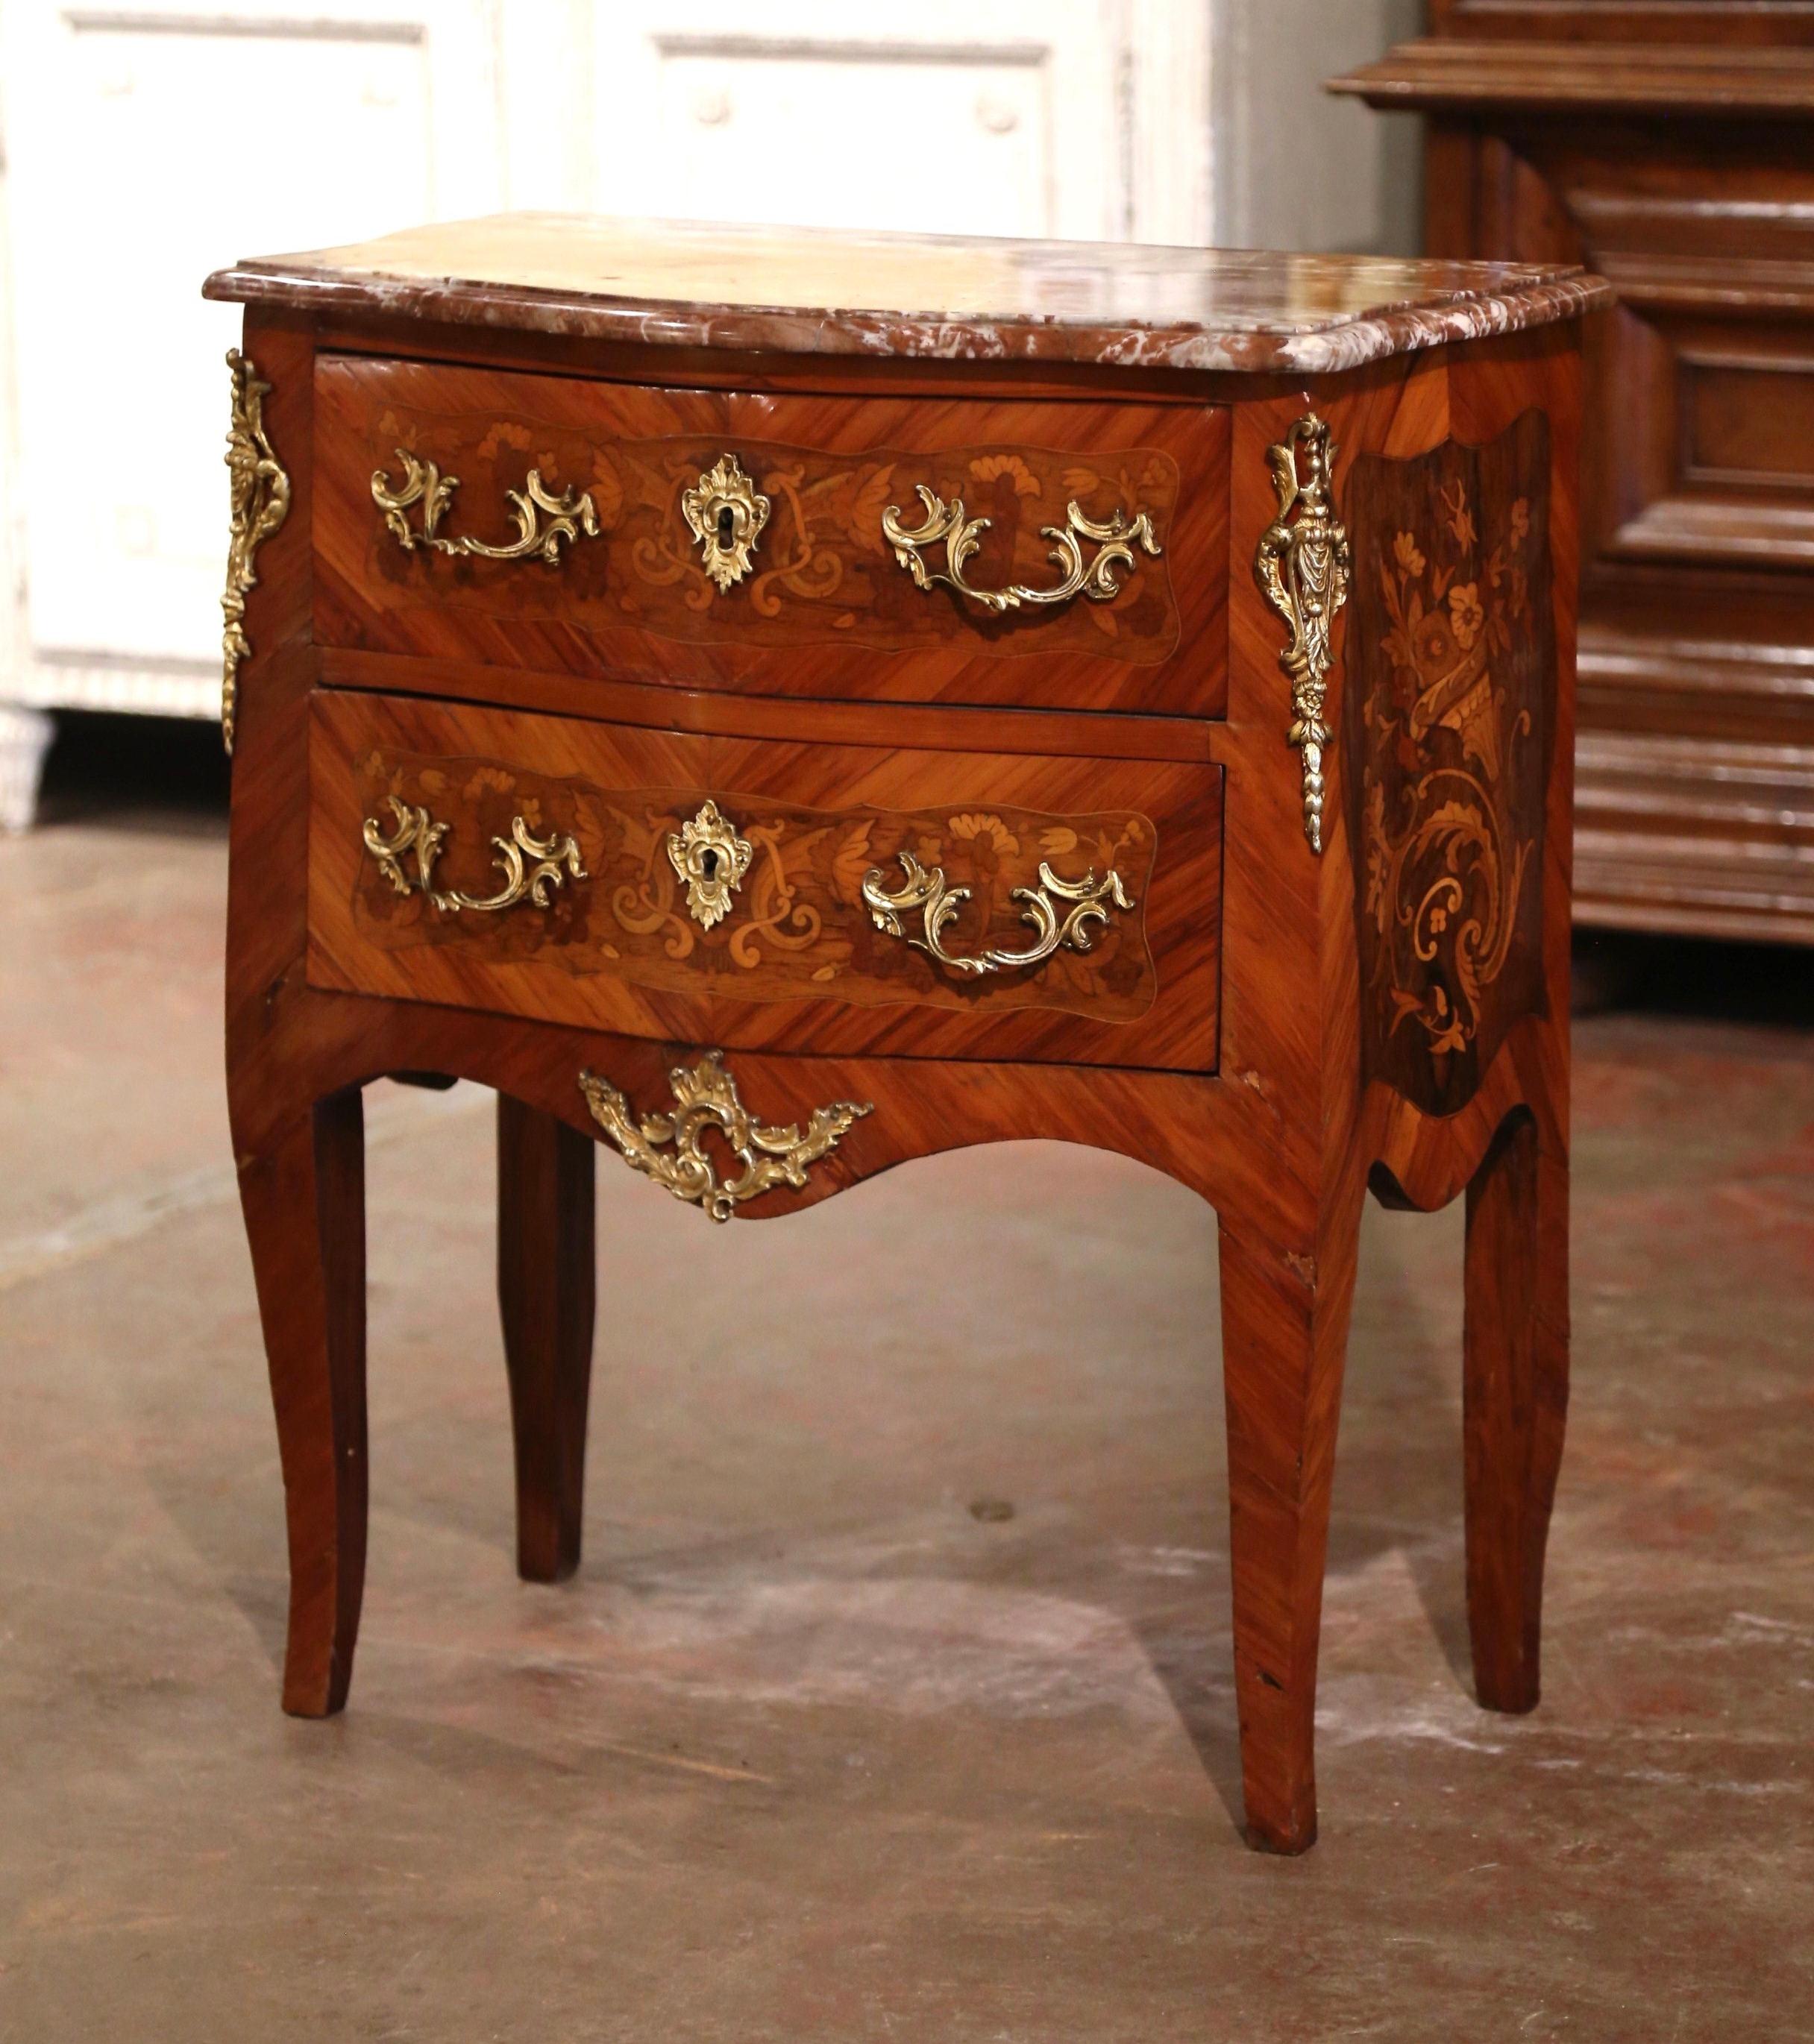 Crafted in France circa 1980, the vintage commode stands on cabriole legs, over a scalloped apron decorated with a center bronze shell and leaf motif mount. The petite fruit wood chest features two bombe drawers across the front embellished with